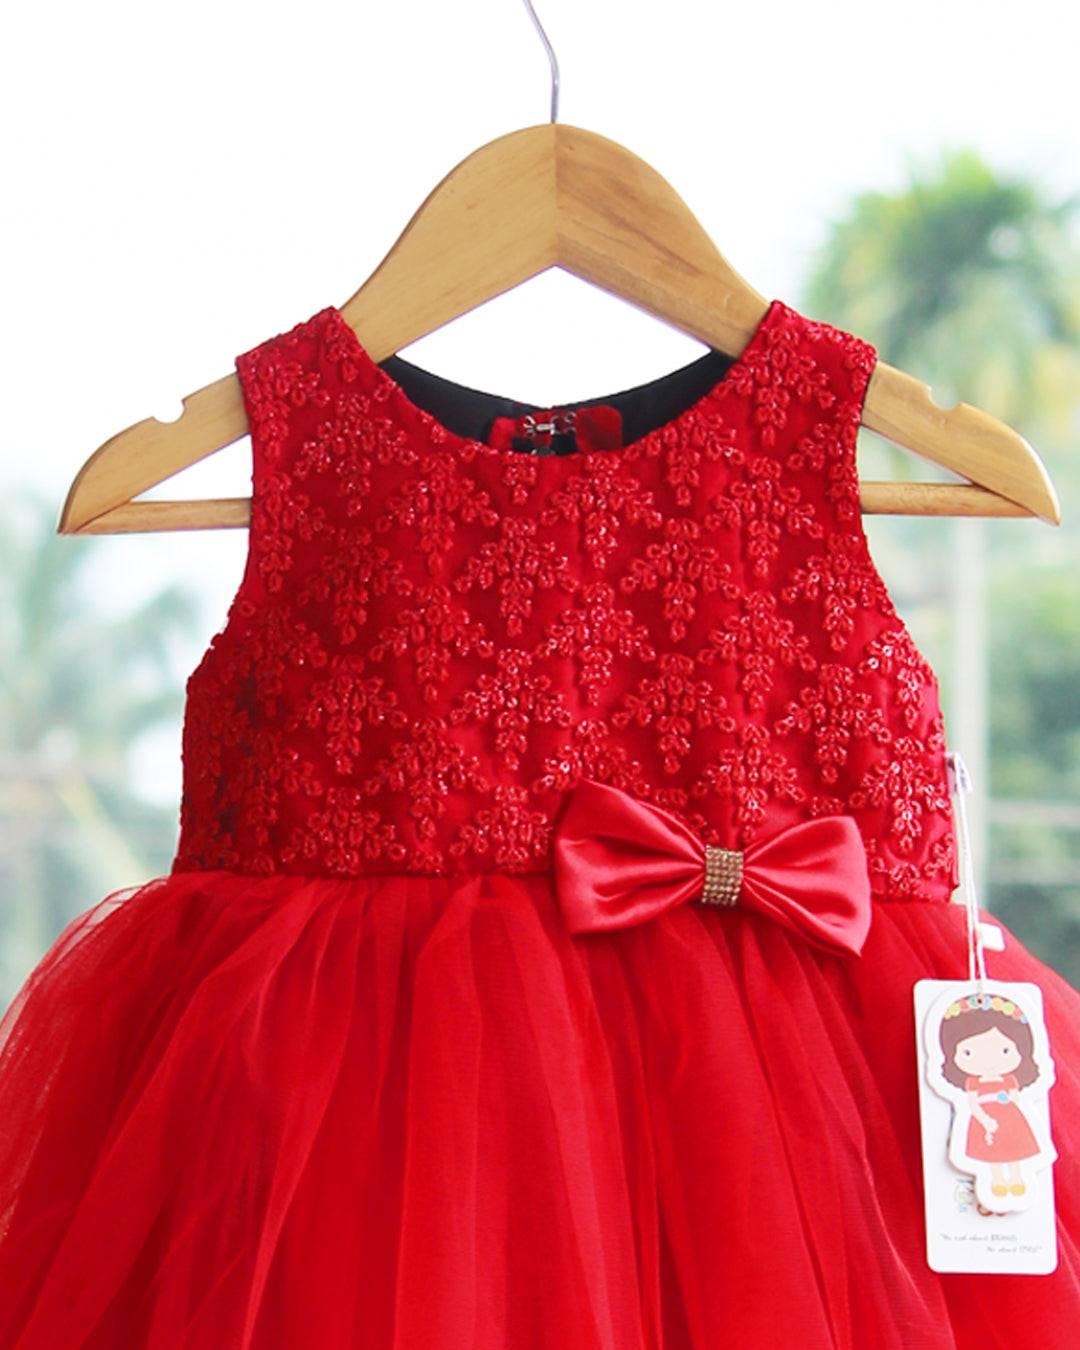 Red Colour Premium Thread Embroidery Frock.
Fabric: Bright Red mono net with premium same colour threadwork detailing on the yoke portion  Beautifully designed outfit for Baby girls with smooth lining for com